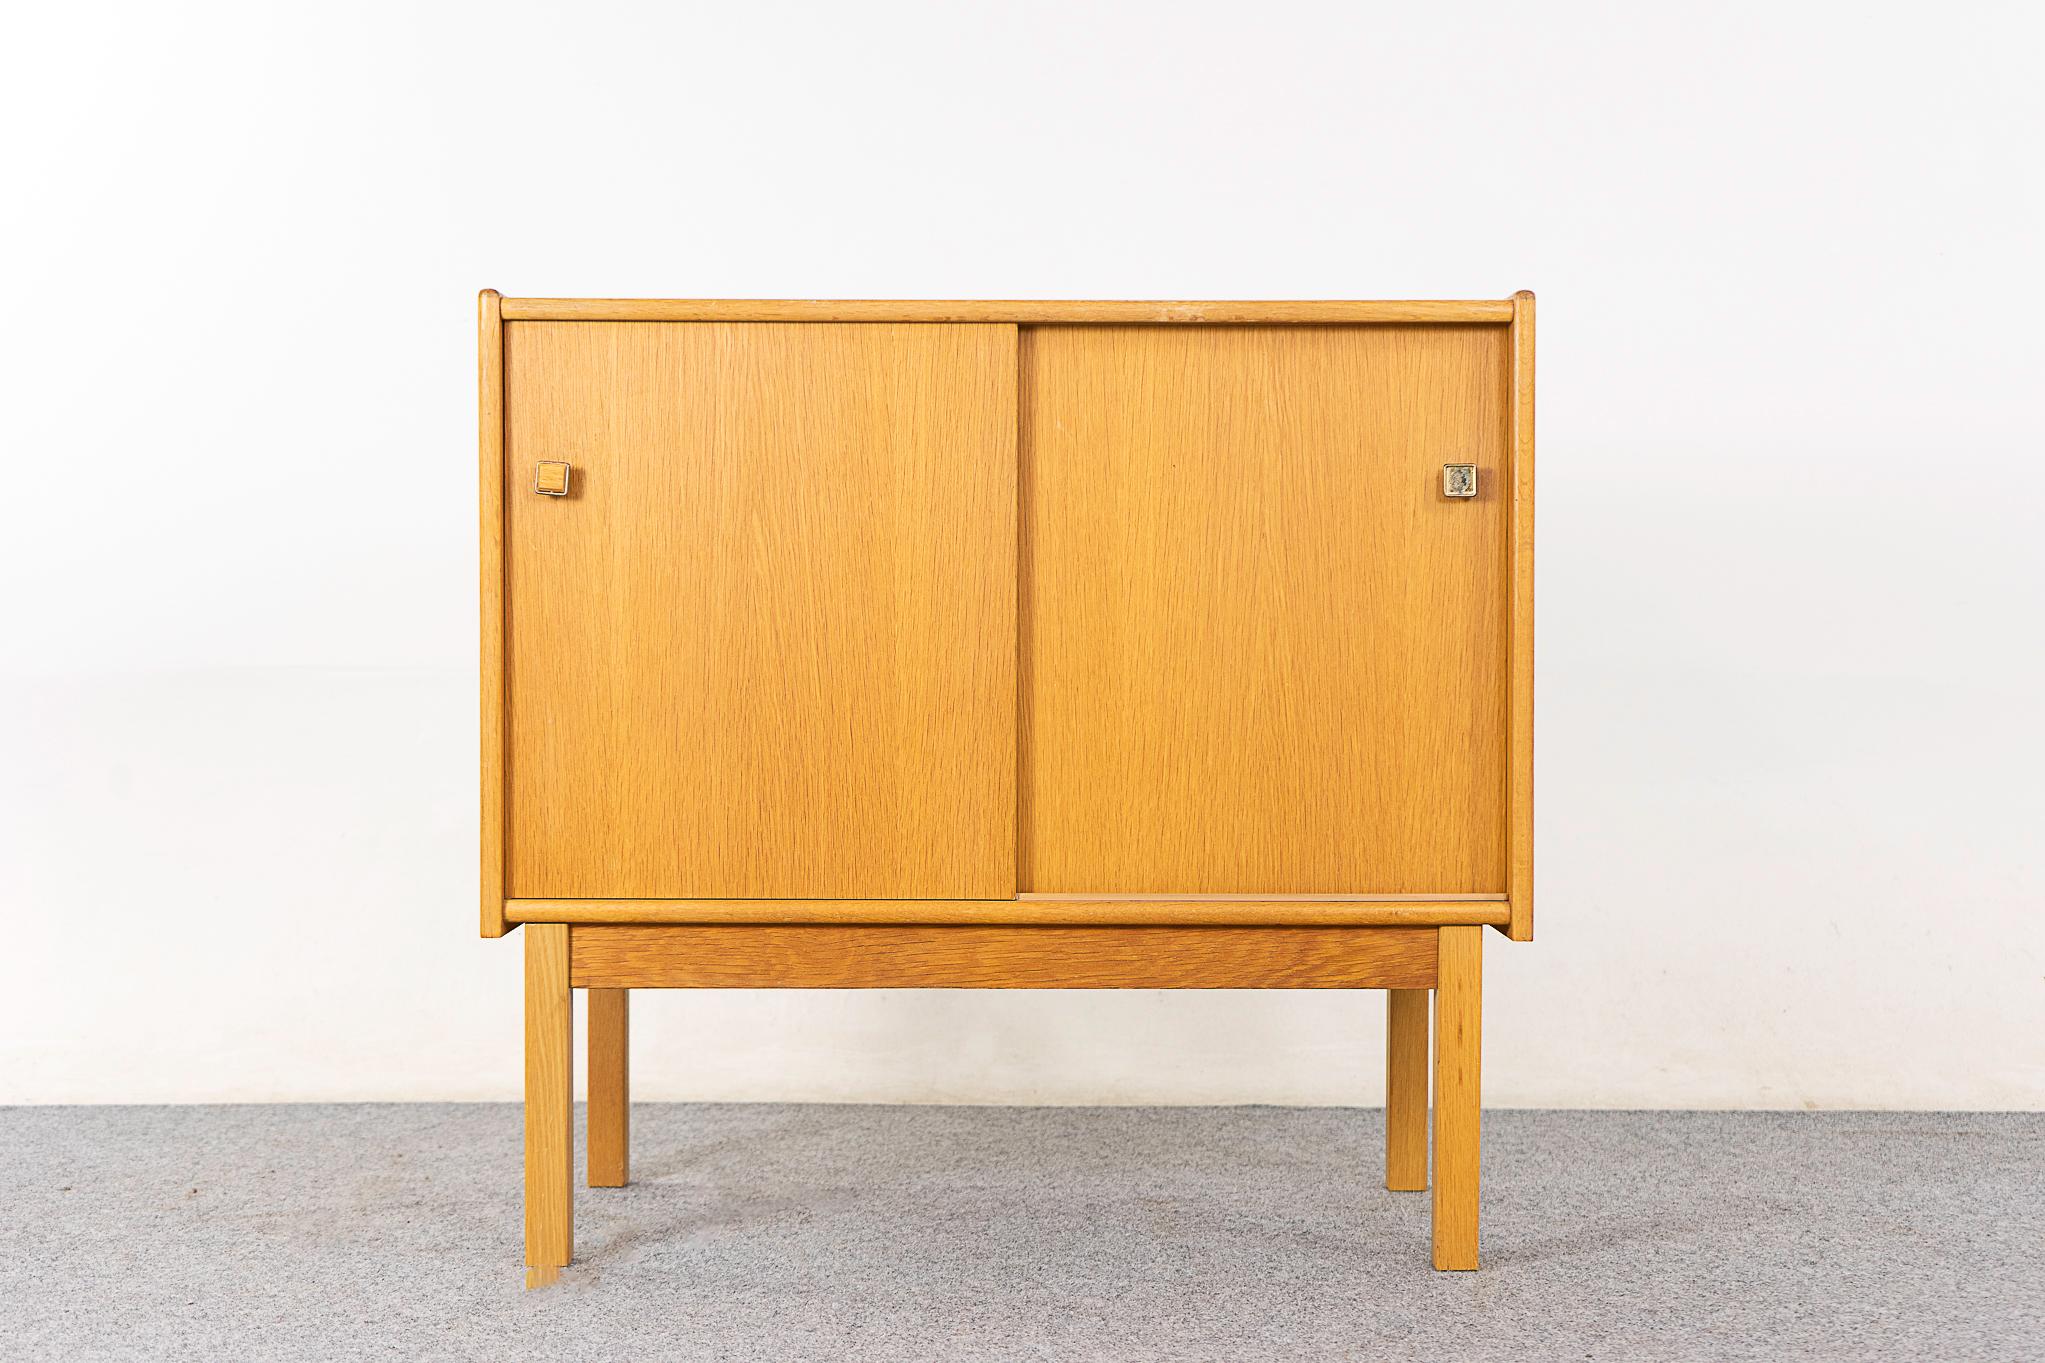 Oak mid-century cabinet, circa 1960's. Clean, simple lined design with book-matched veneer. Sliding doors open to fixed height shelf.

Unrestored item with option to purchase in restored condition for an additional $150. Restoration includes: